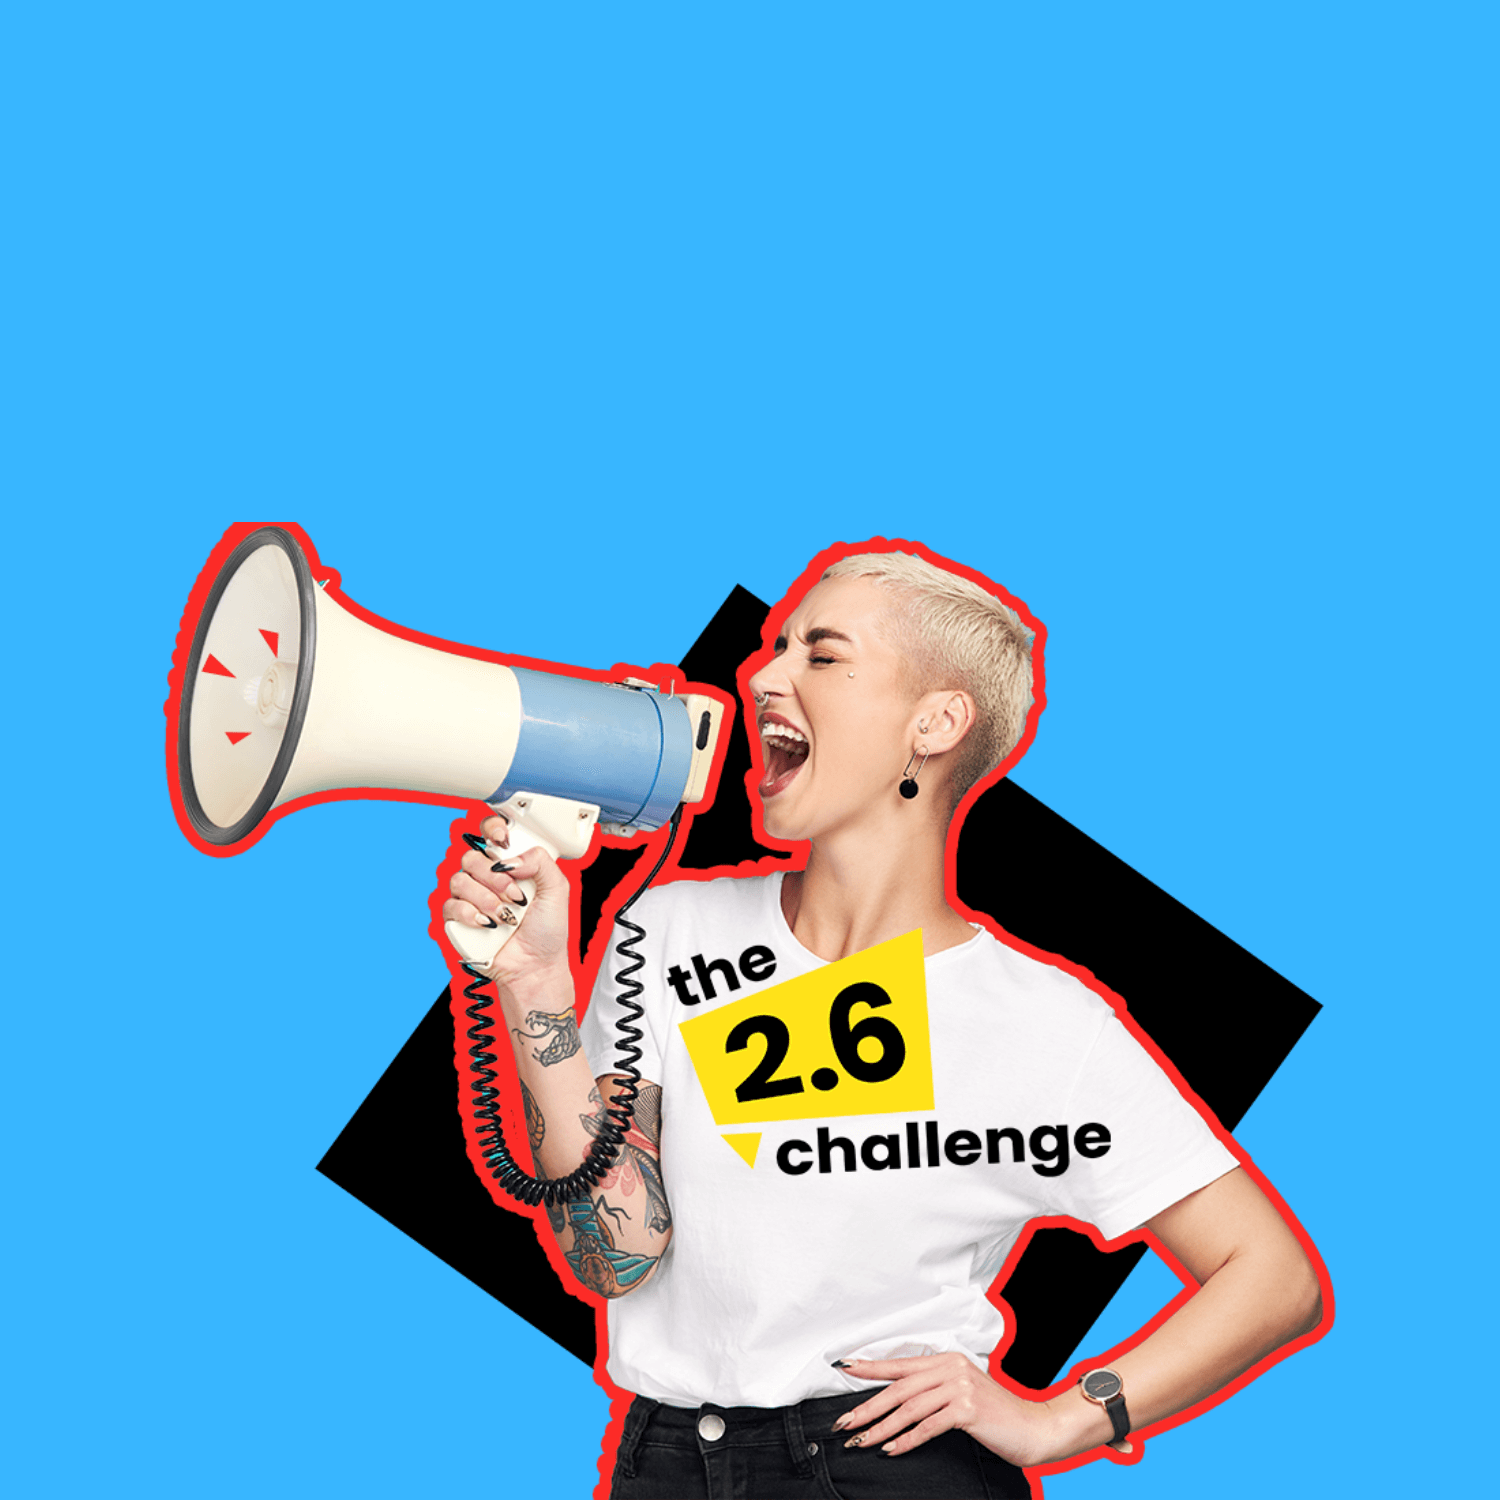 Join Team Smart Works and take part in the 2.6 Challenge image